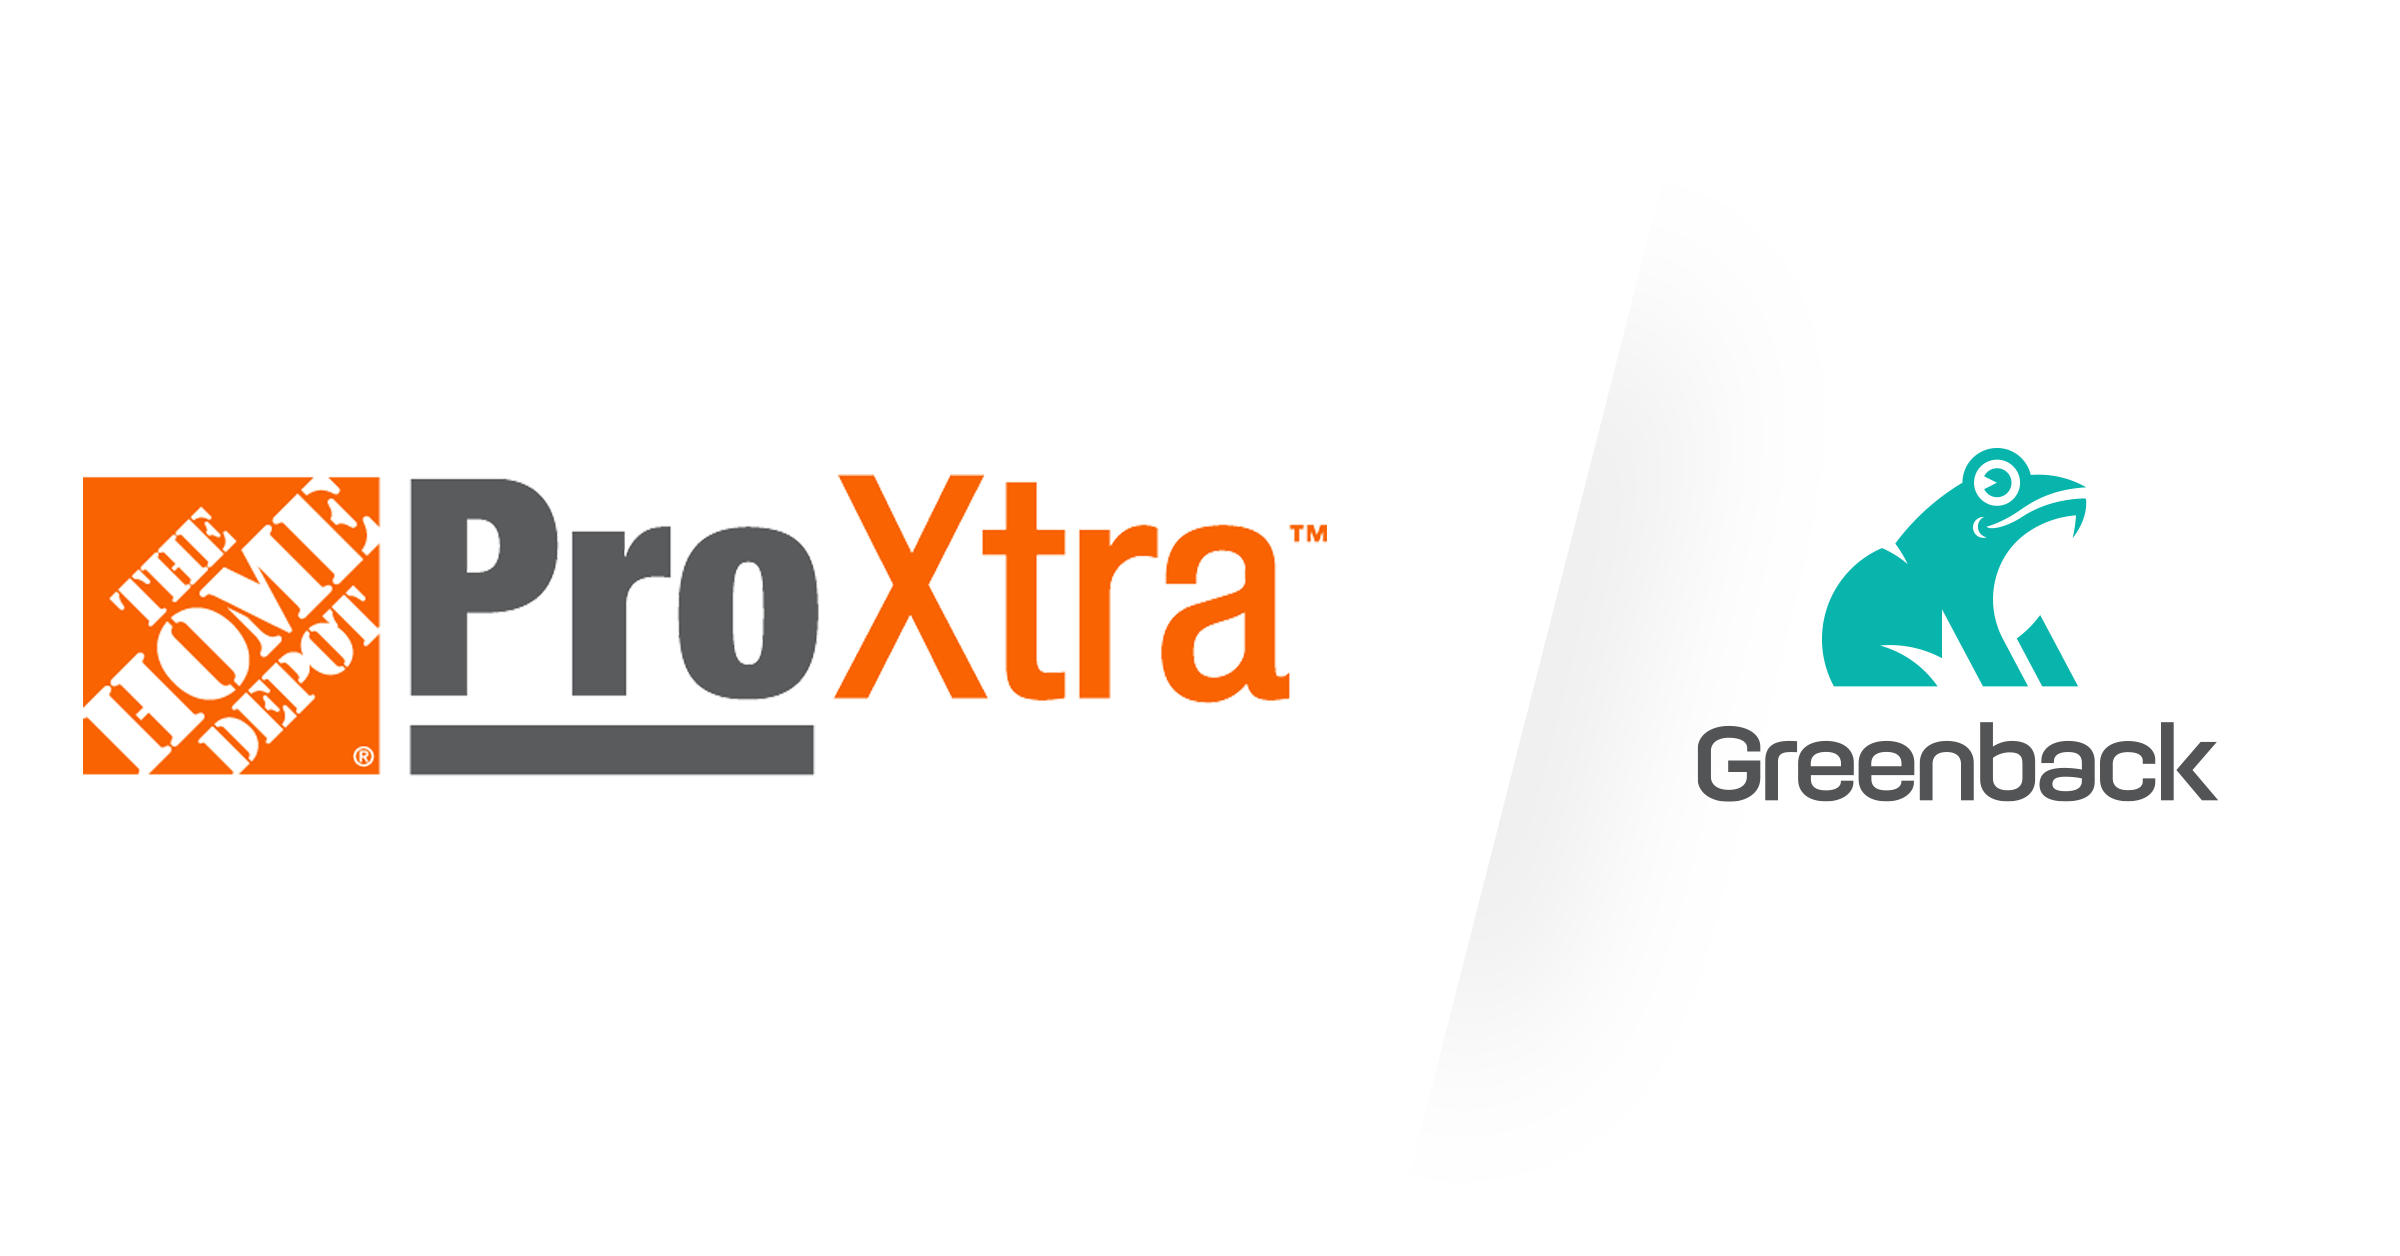 XtraTools Pro 23.10.1 download the new for android